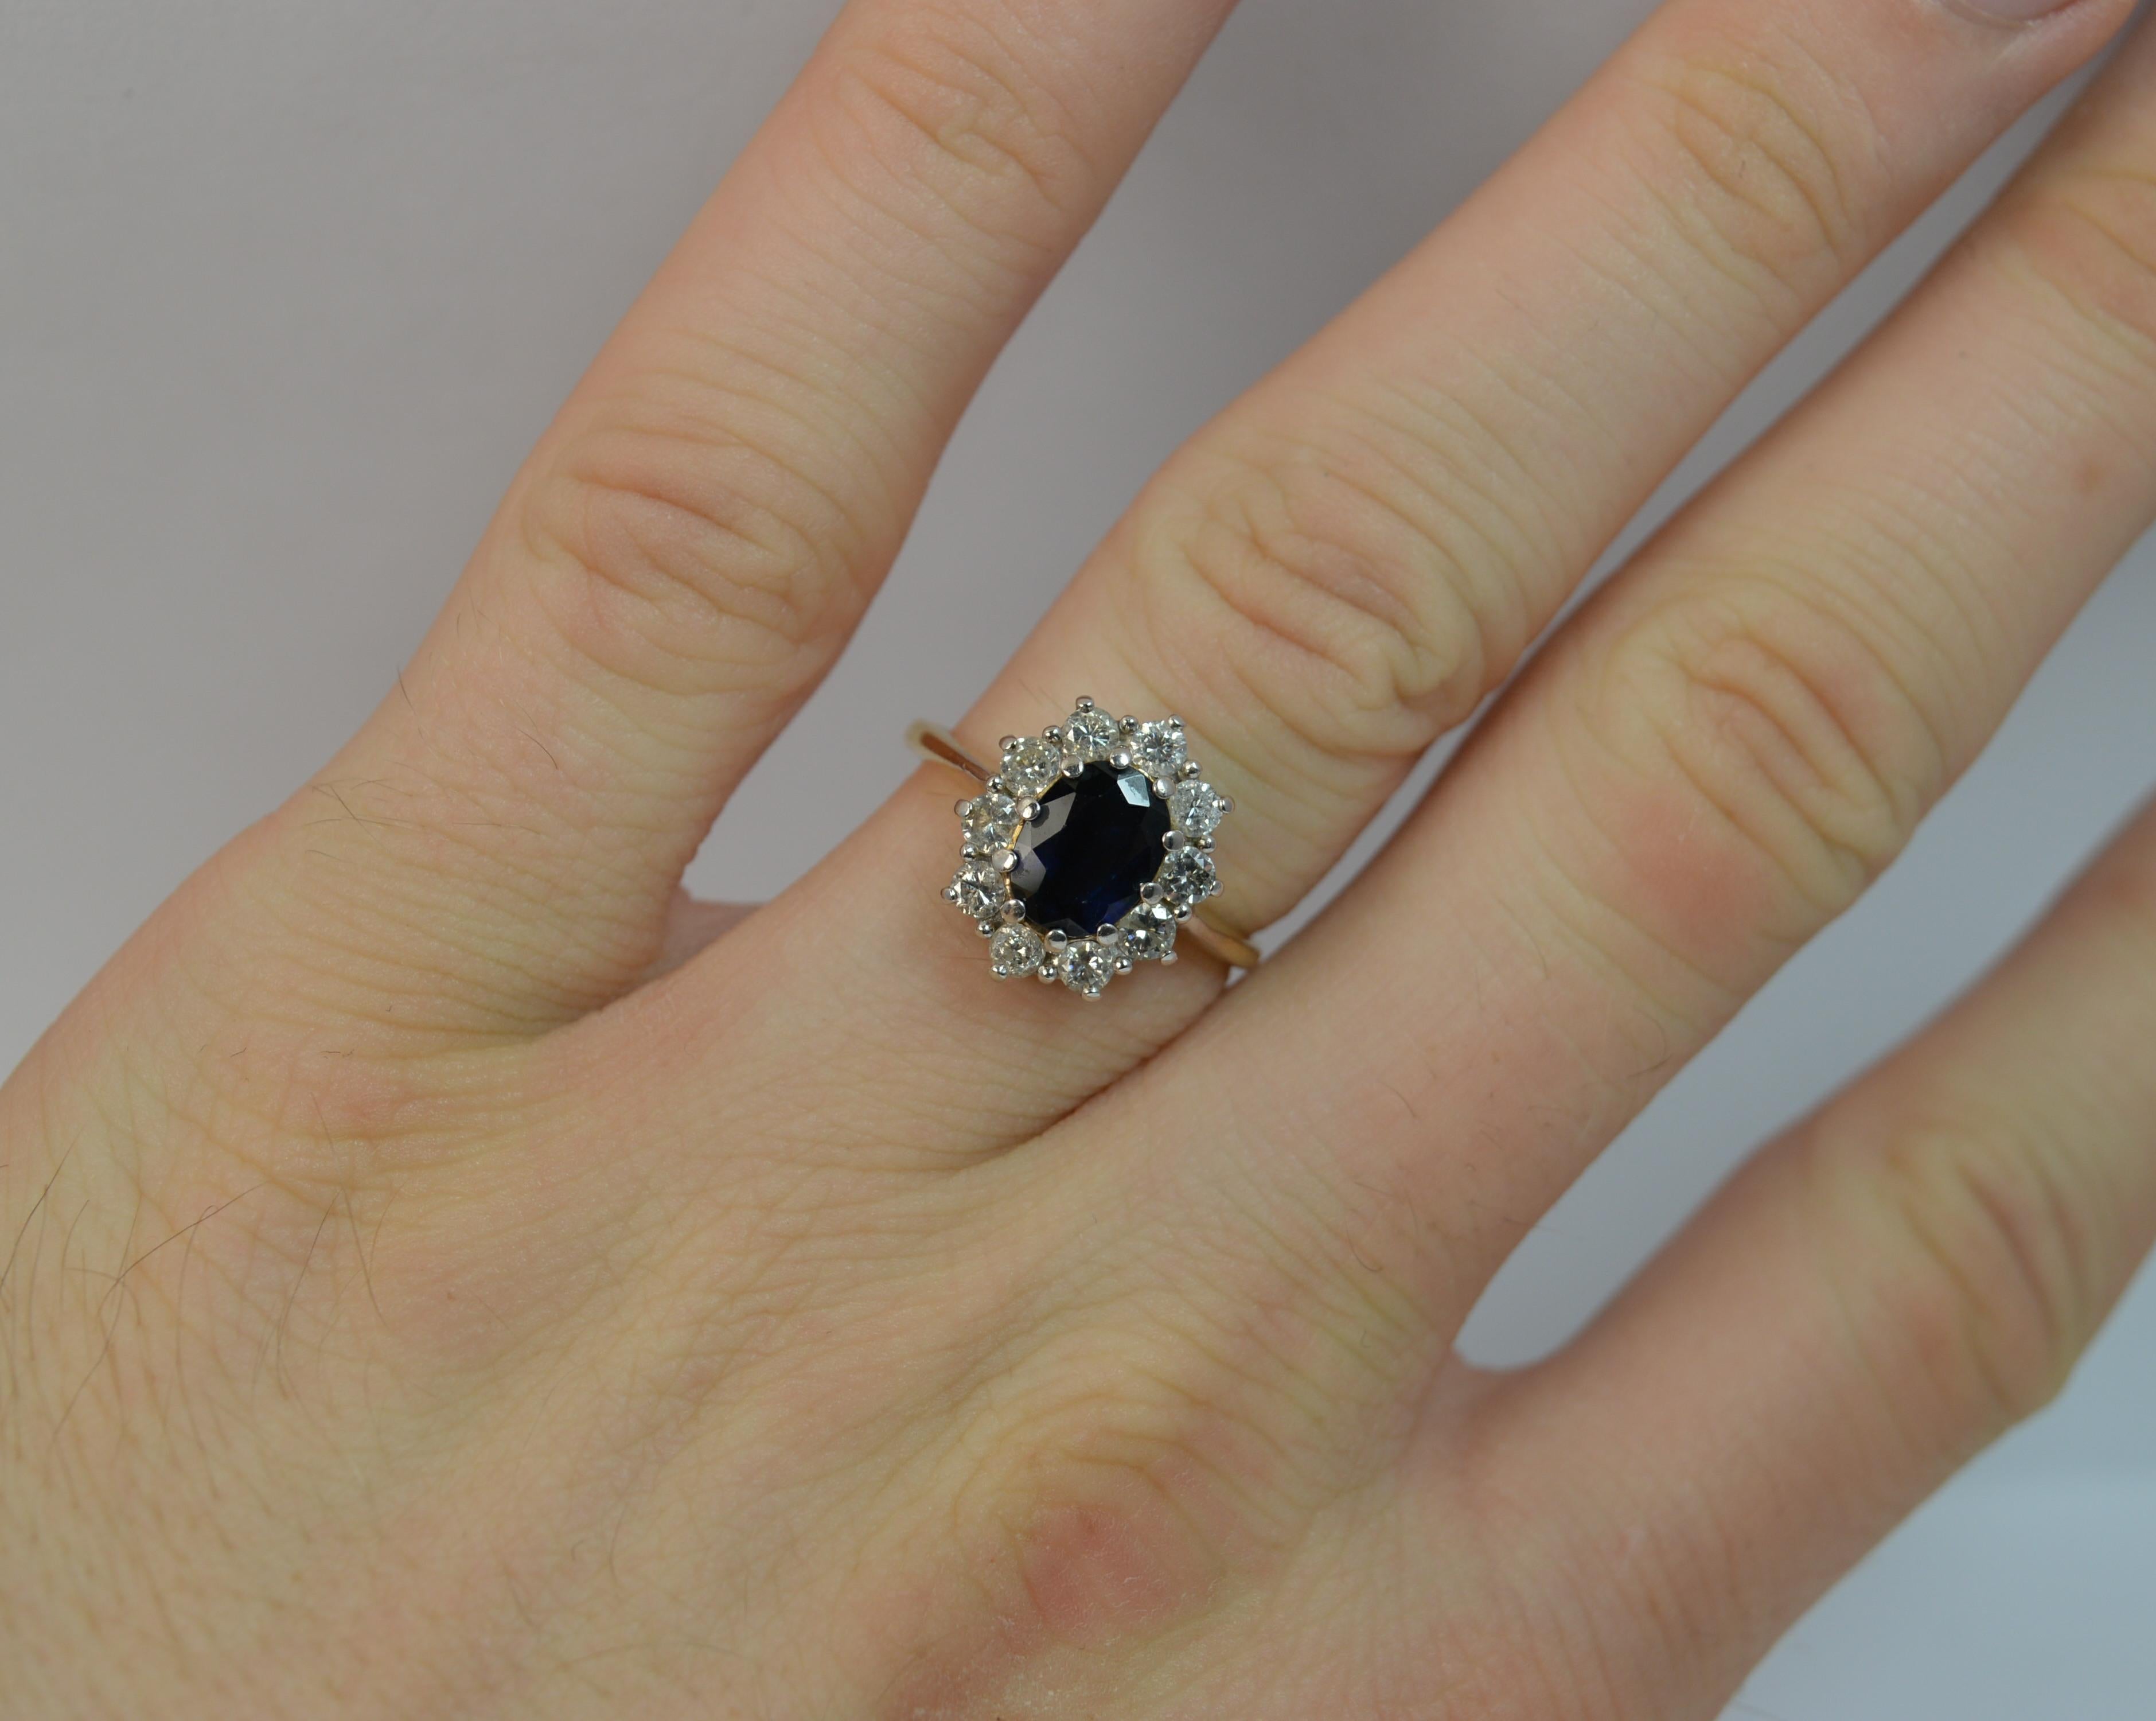 A beautiful Sapphire and Diamond ring.
SIZE ; N UK, 6 3/4 US and sizeable
Solid 18 carat yellow gold shank with white gold head.

Designed with a sapphire to the centre of superb dark clear blue colour. 5.7mm x 7.6mm approx. Surrounding are 10 round